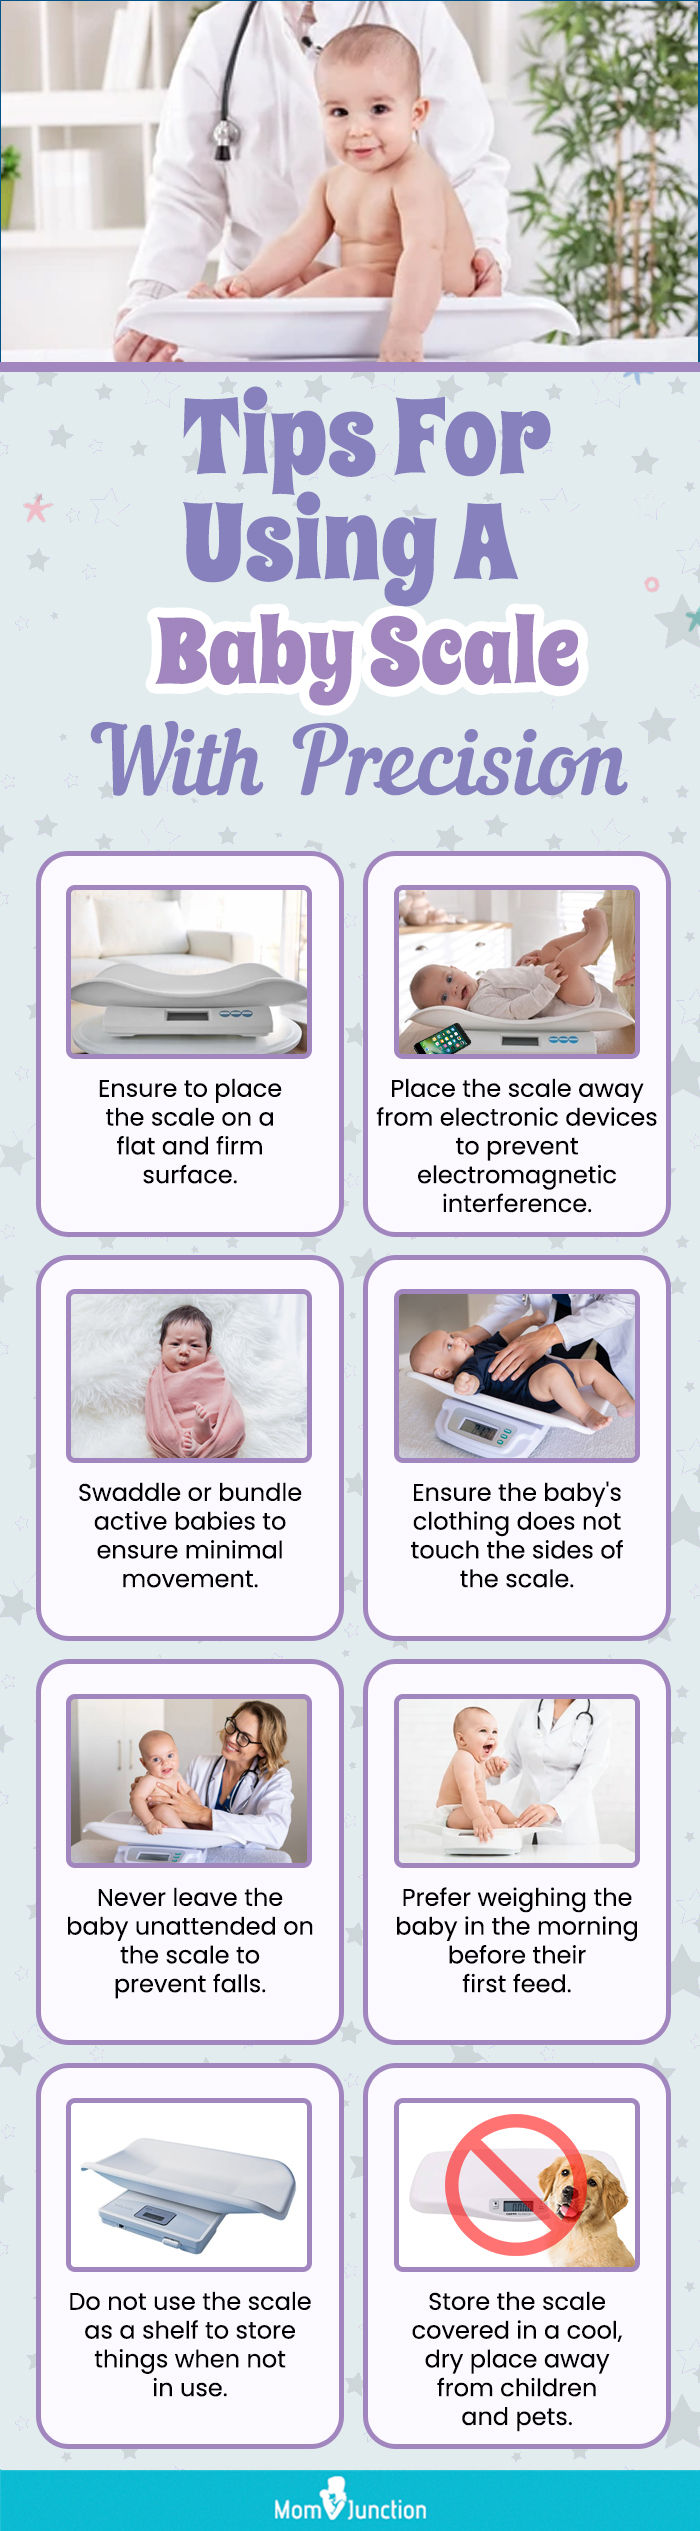 https://www.momjunction.com/wp-content/uploads/2023/07/Tips-For-Using-A-Baby-Scale-With-Precision.jpg